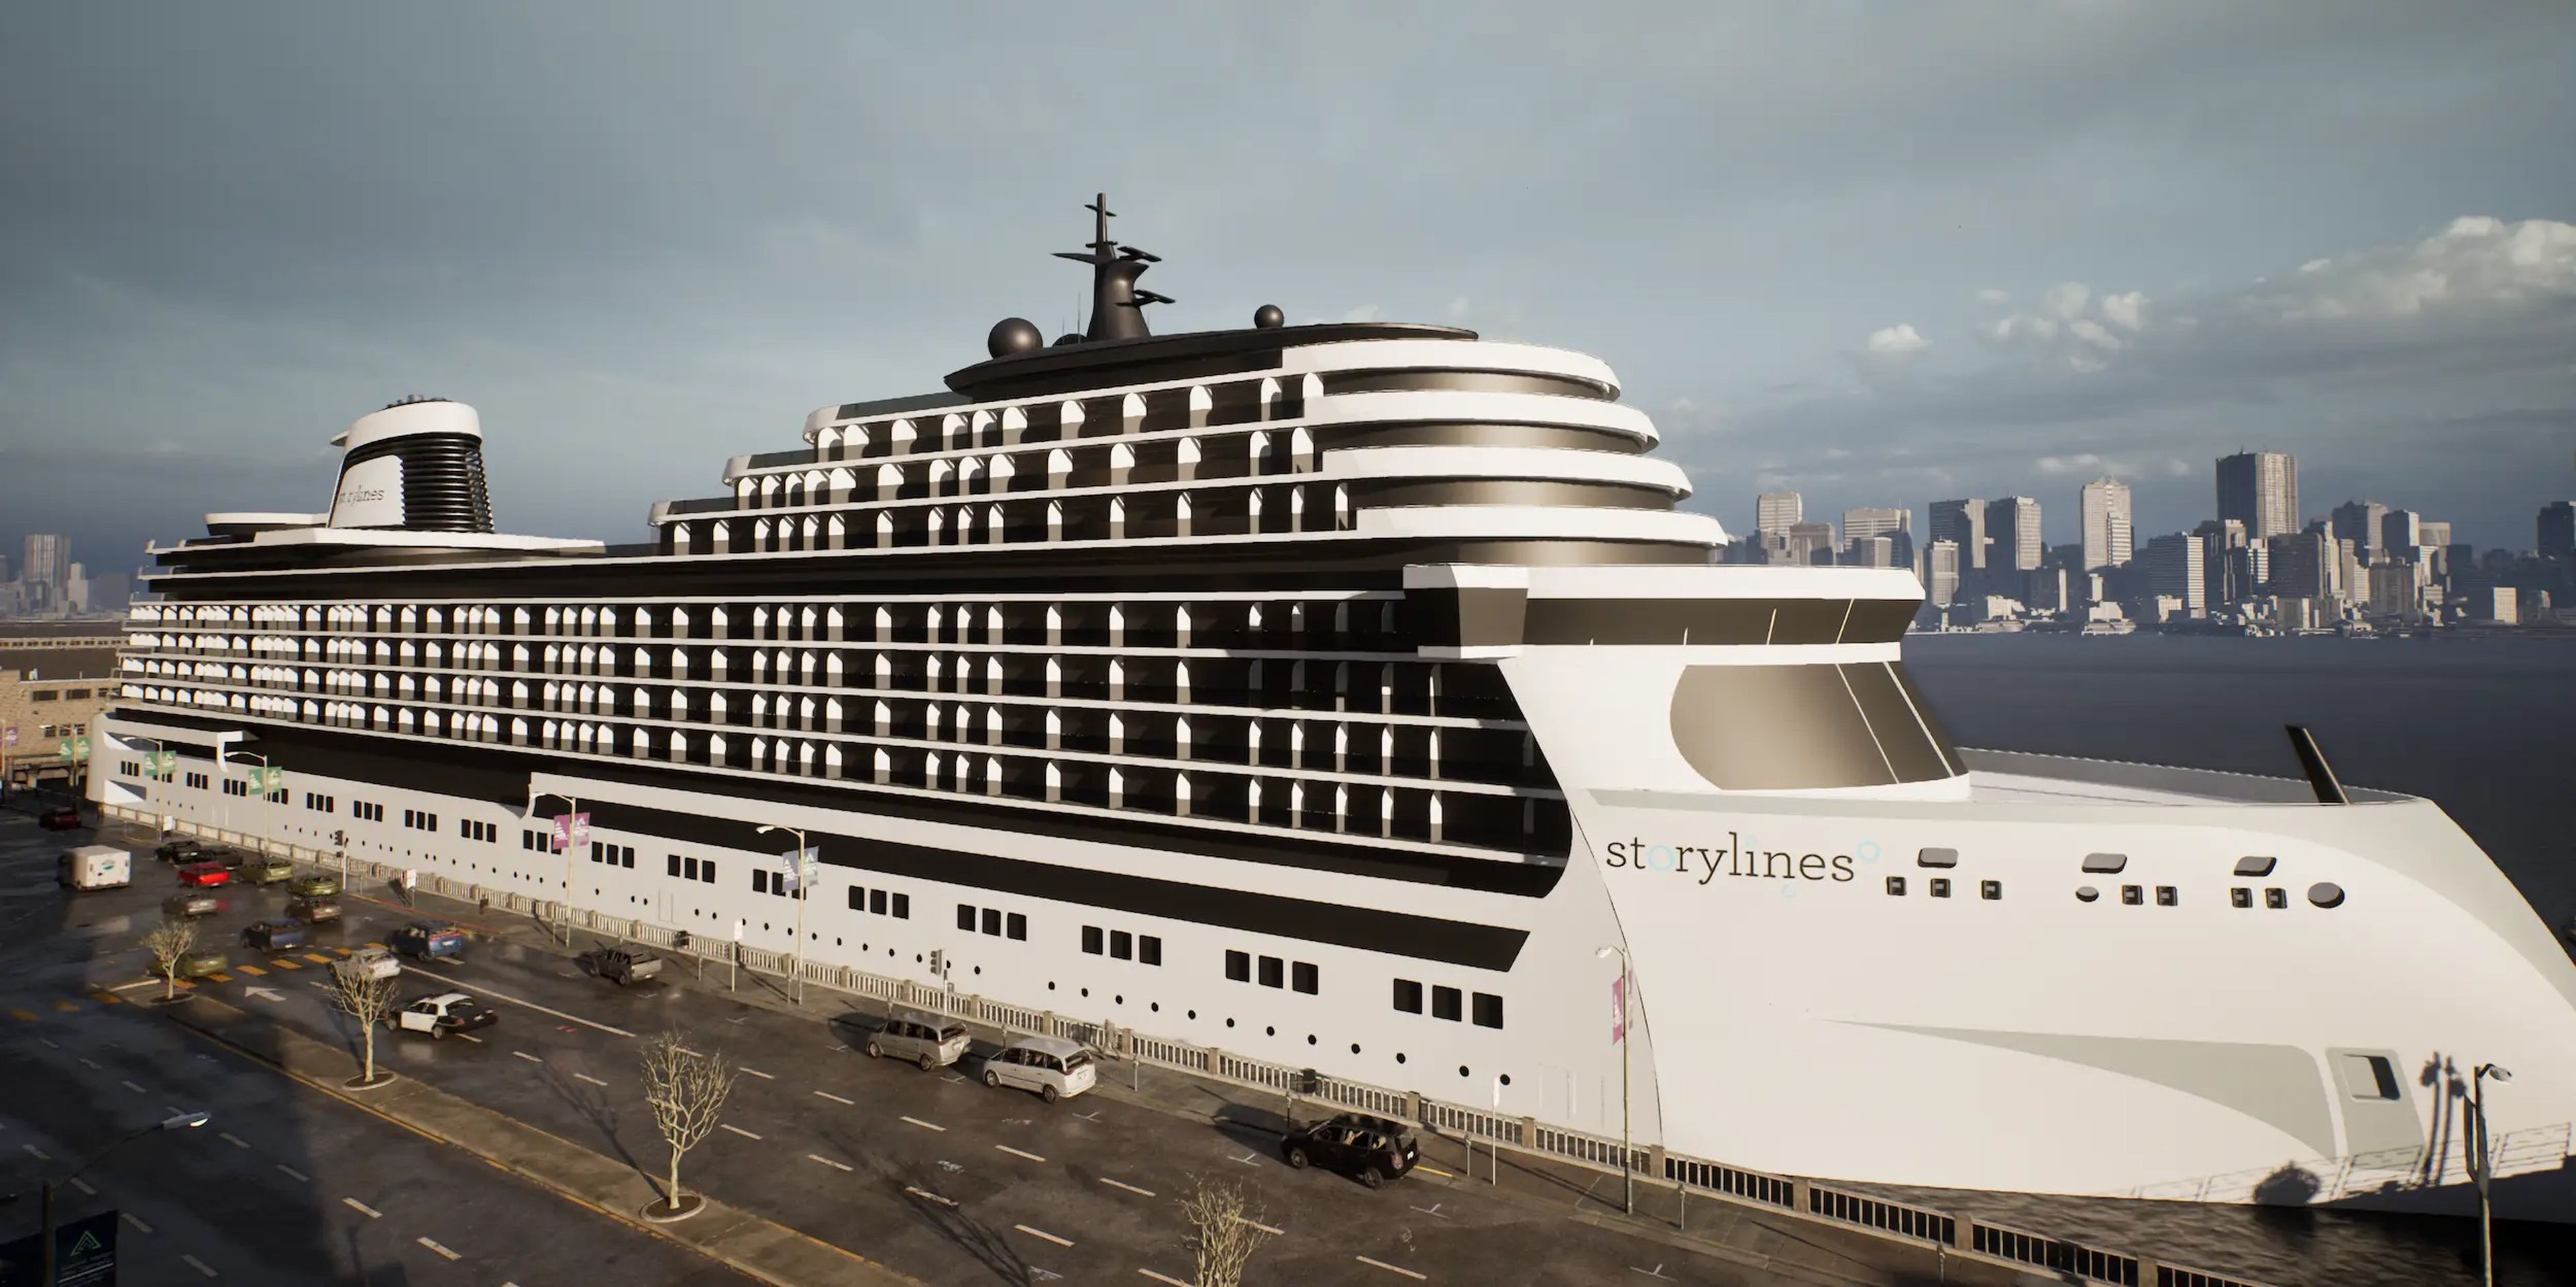 A rendering of Storylines' MV Narrative cruise ship.